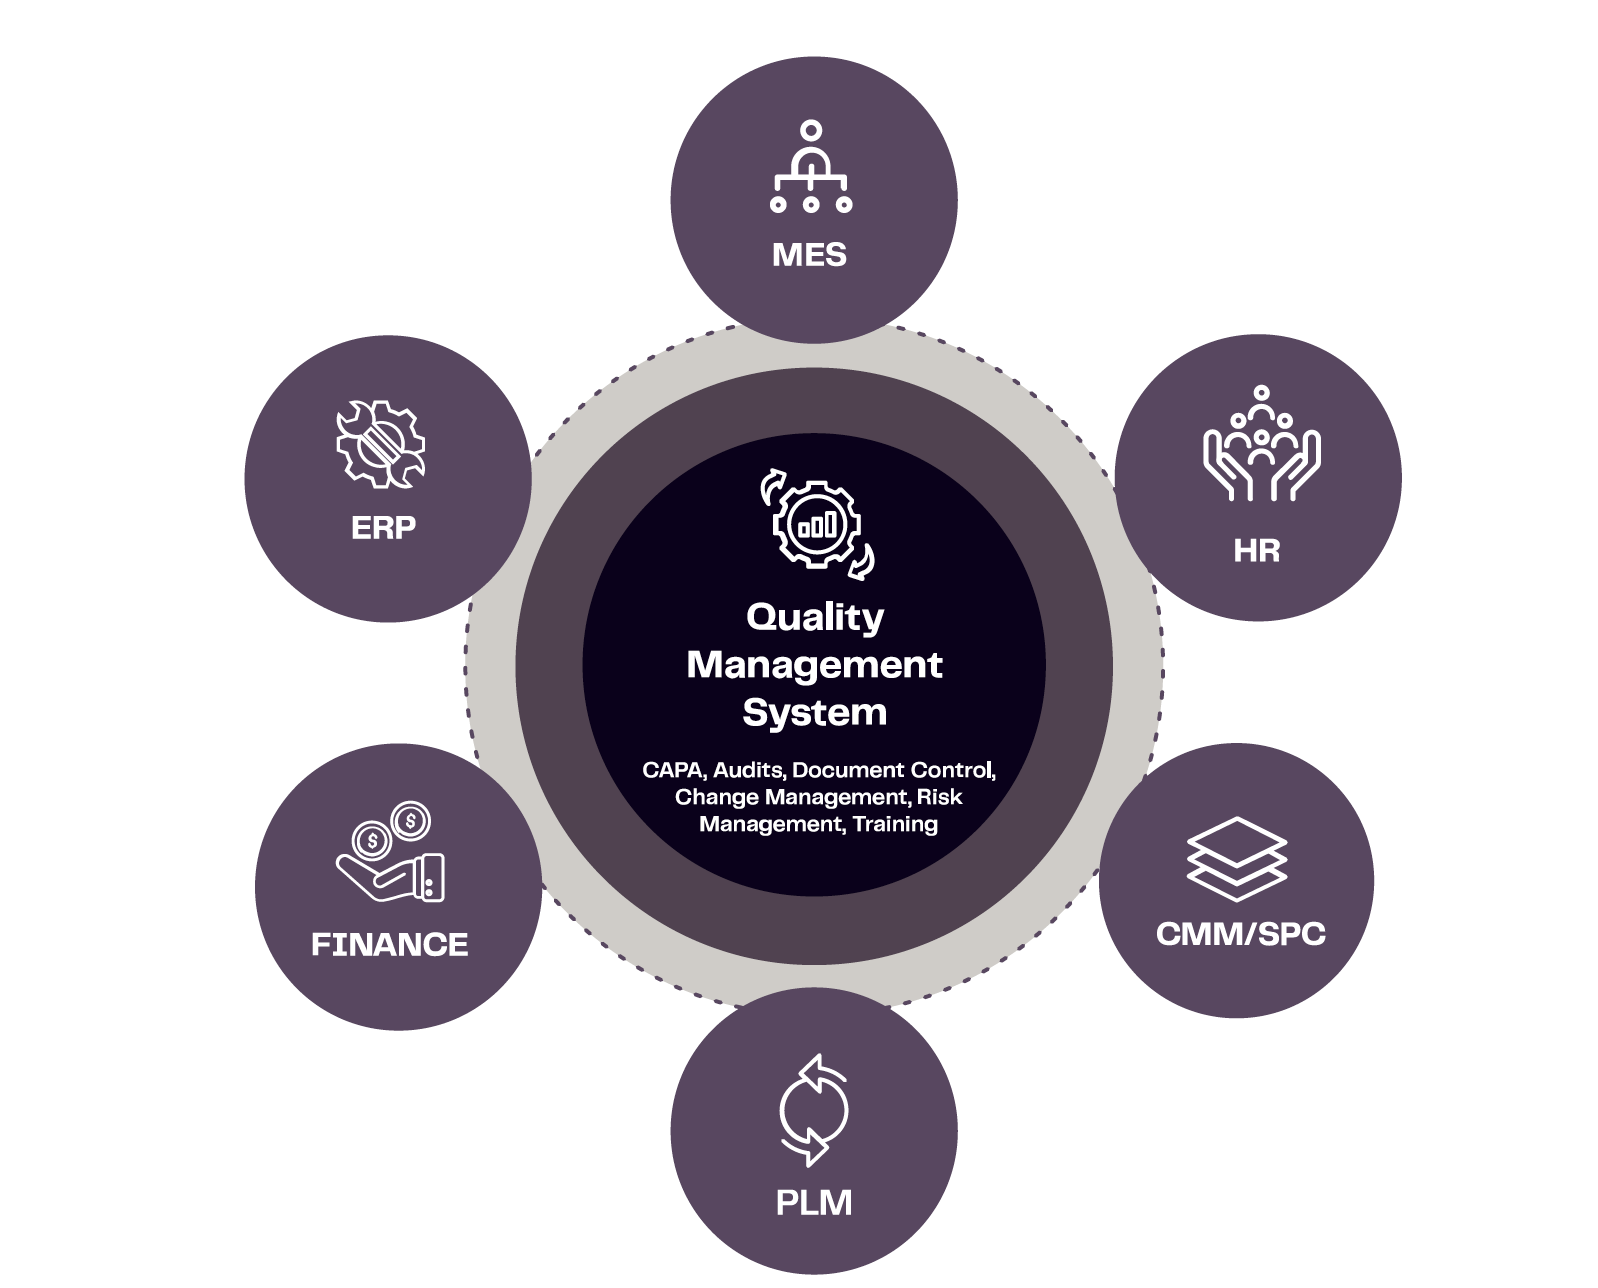 The ETQ Enterprise Integration Hub is an example of quality management software.